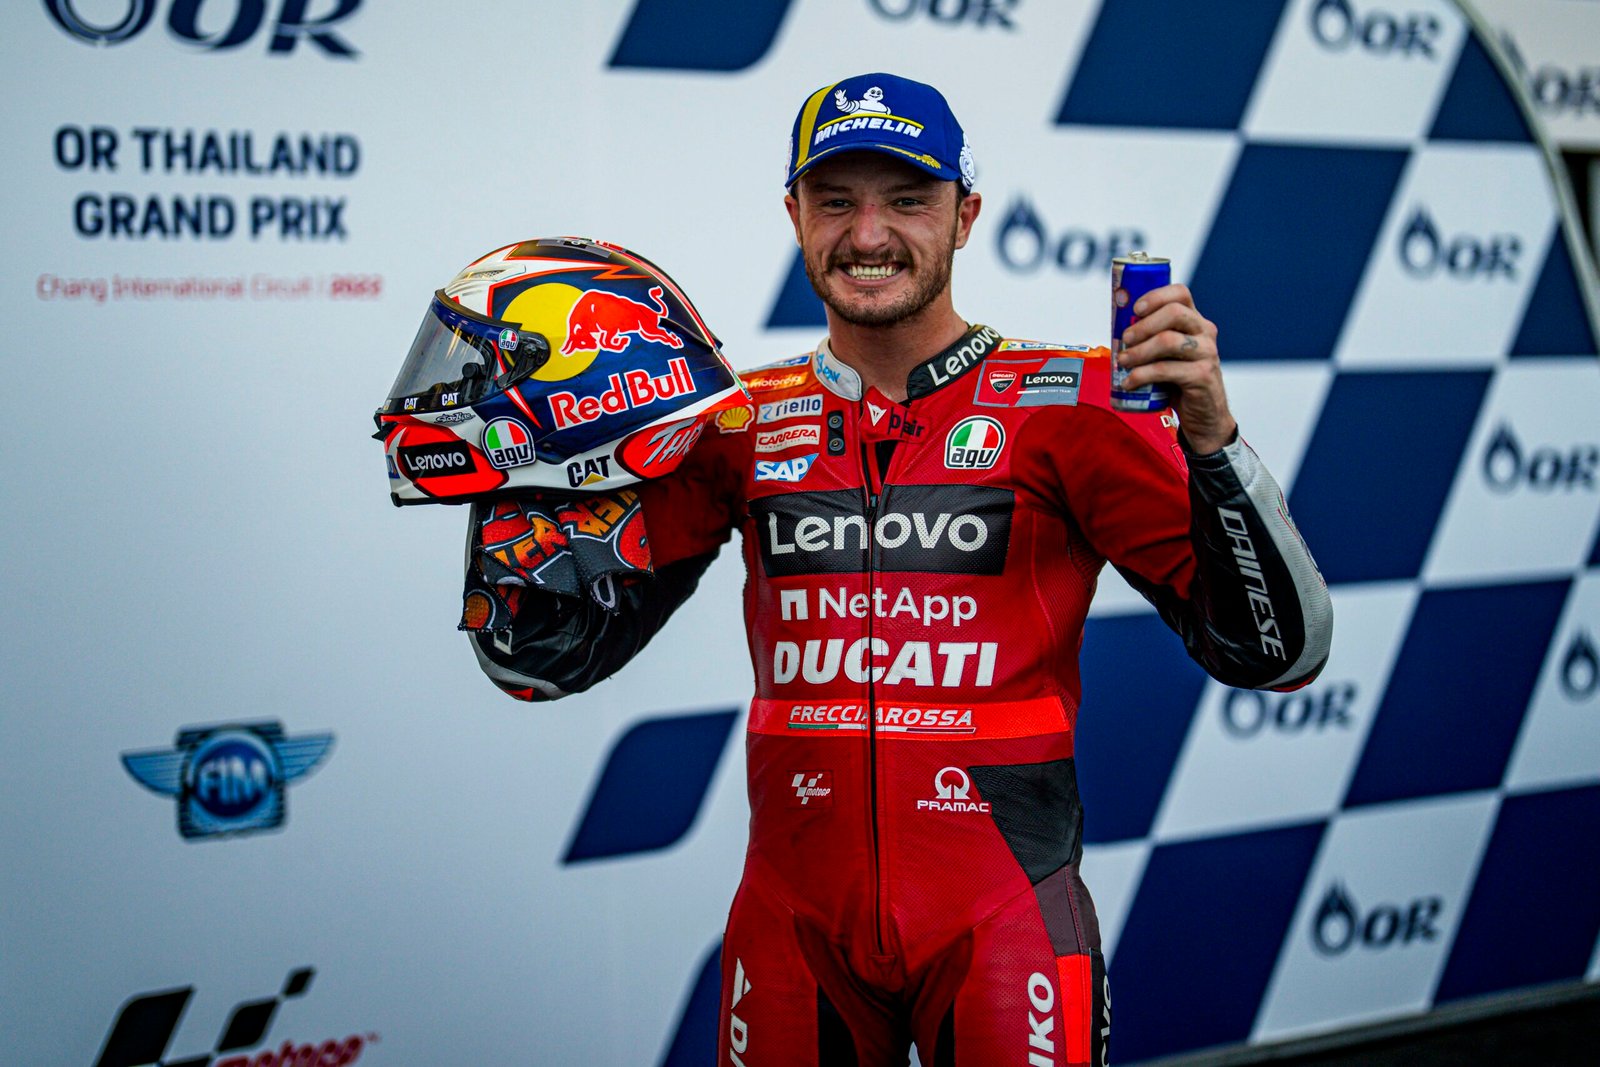 Double podium for the Ducati Lenovo Team in the Thai GP, with Jack Miller second and Pecco Bagnaia third in Buriram. The Italian rider is now -2 points off leader Quartararo